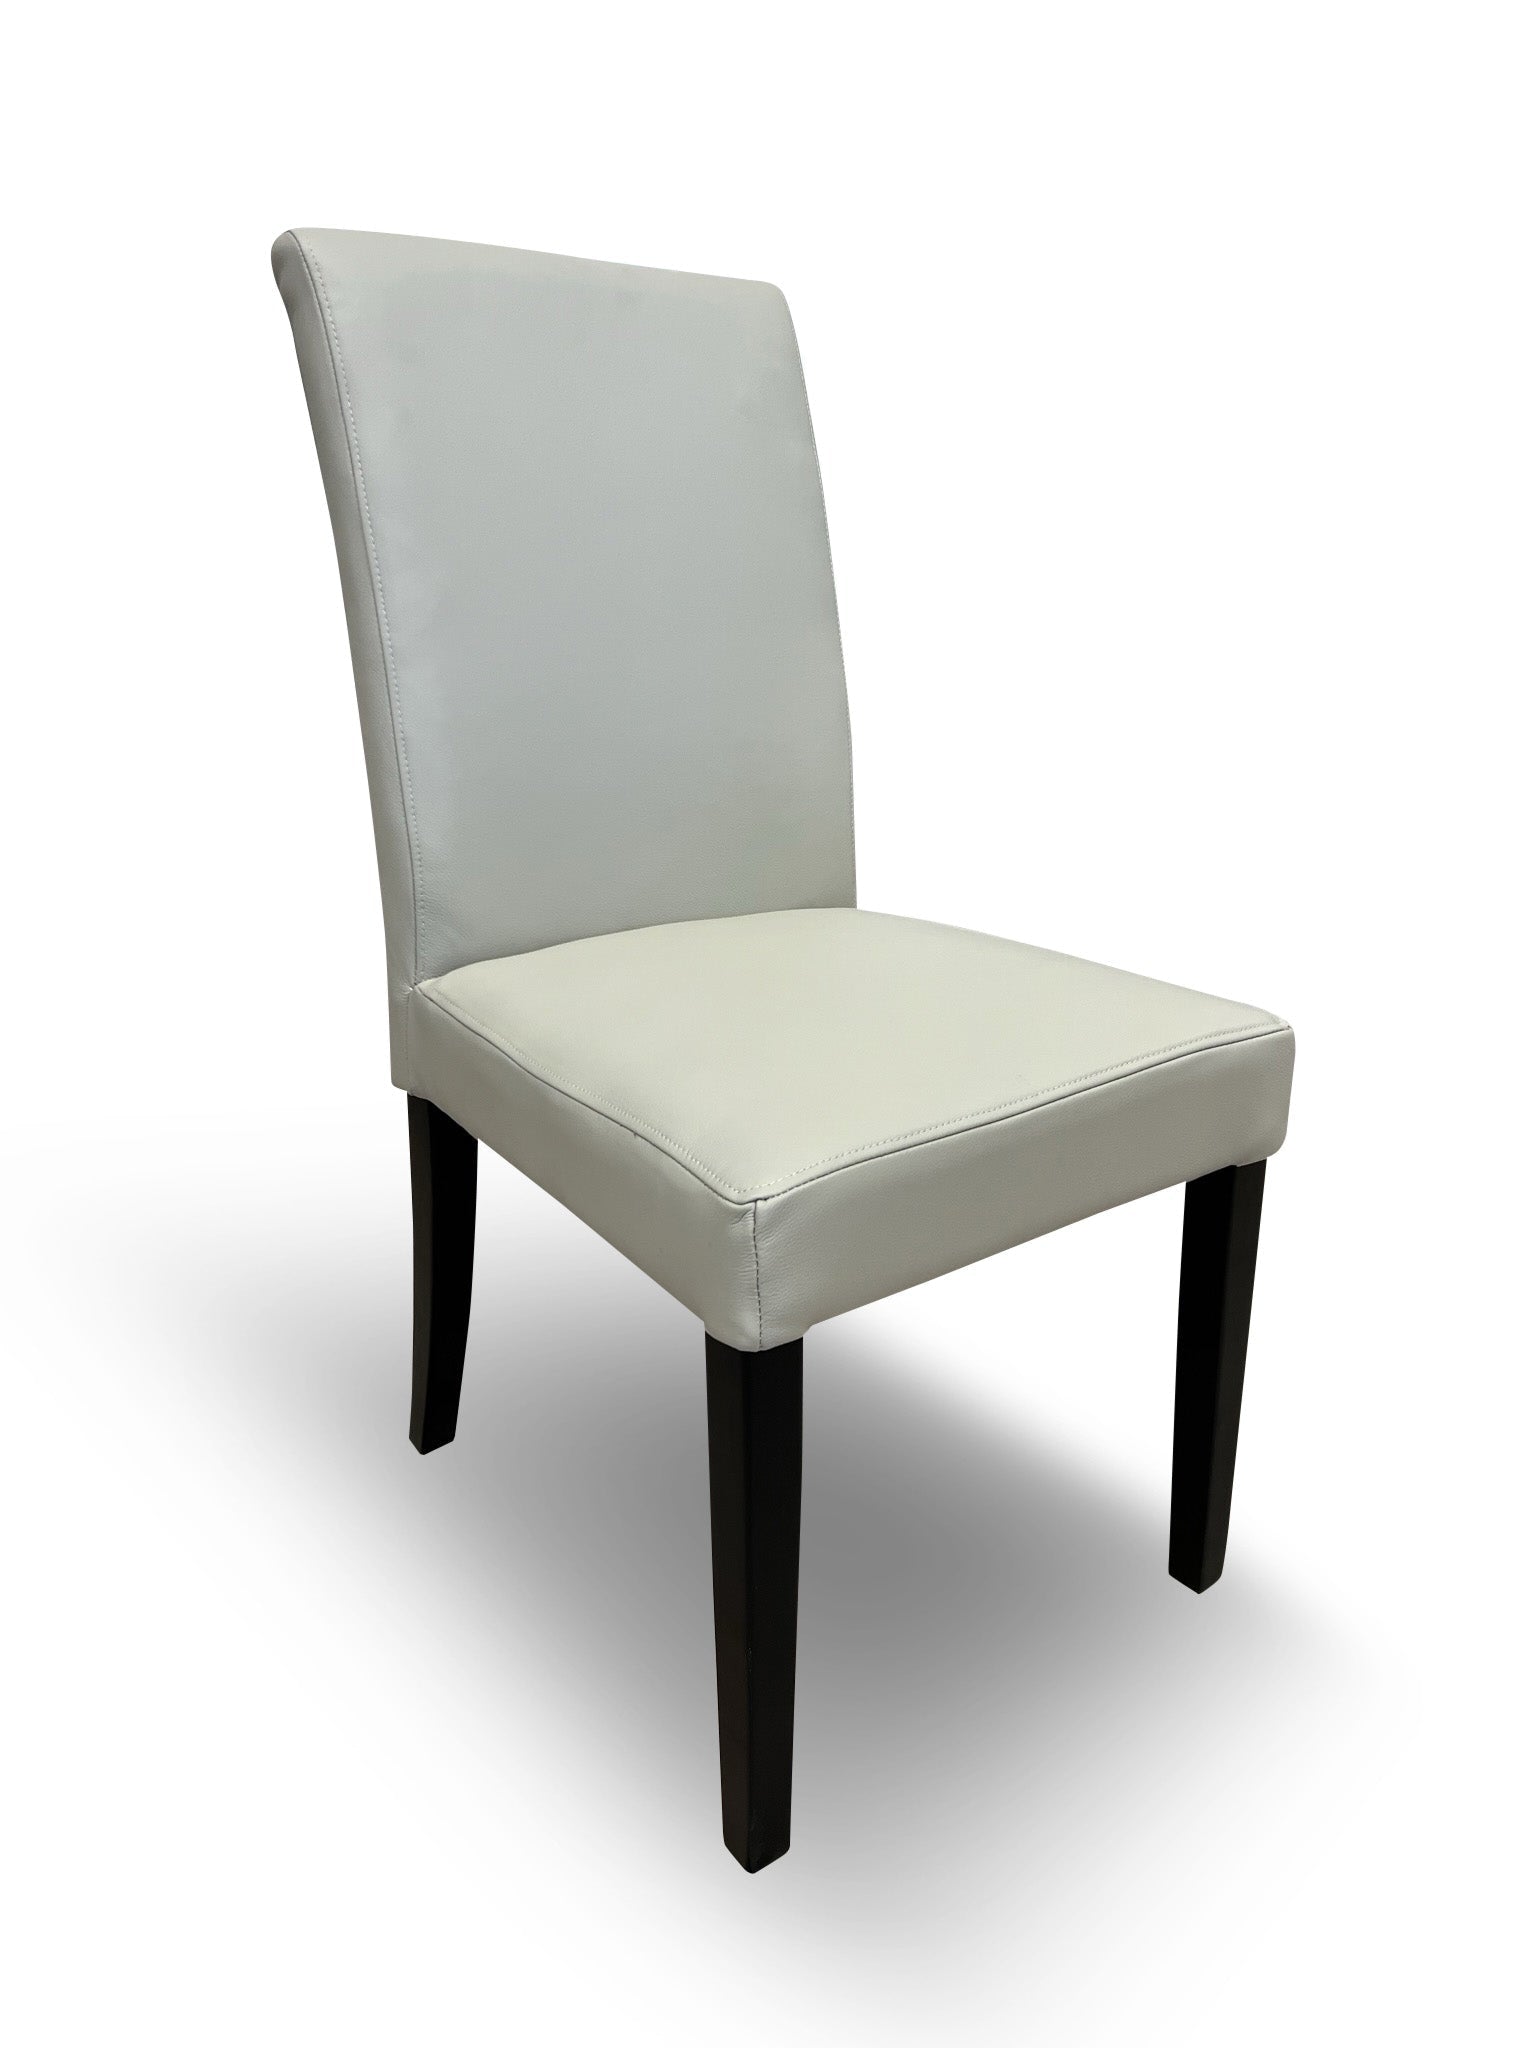 Vancouver 100% Leather Chair In Stone